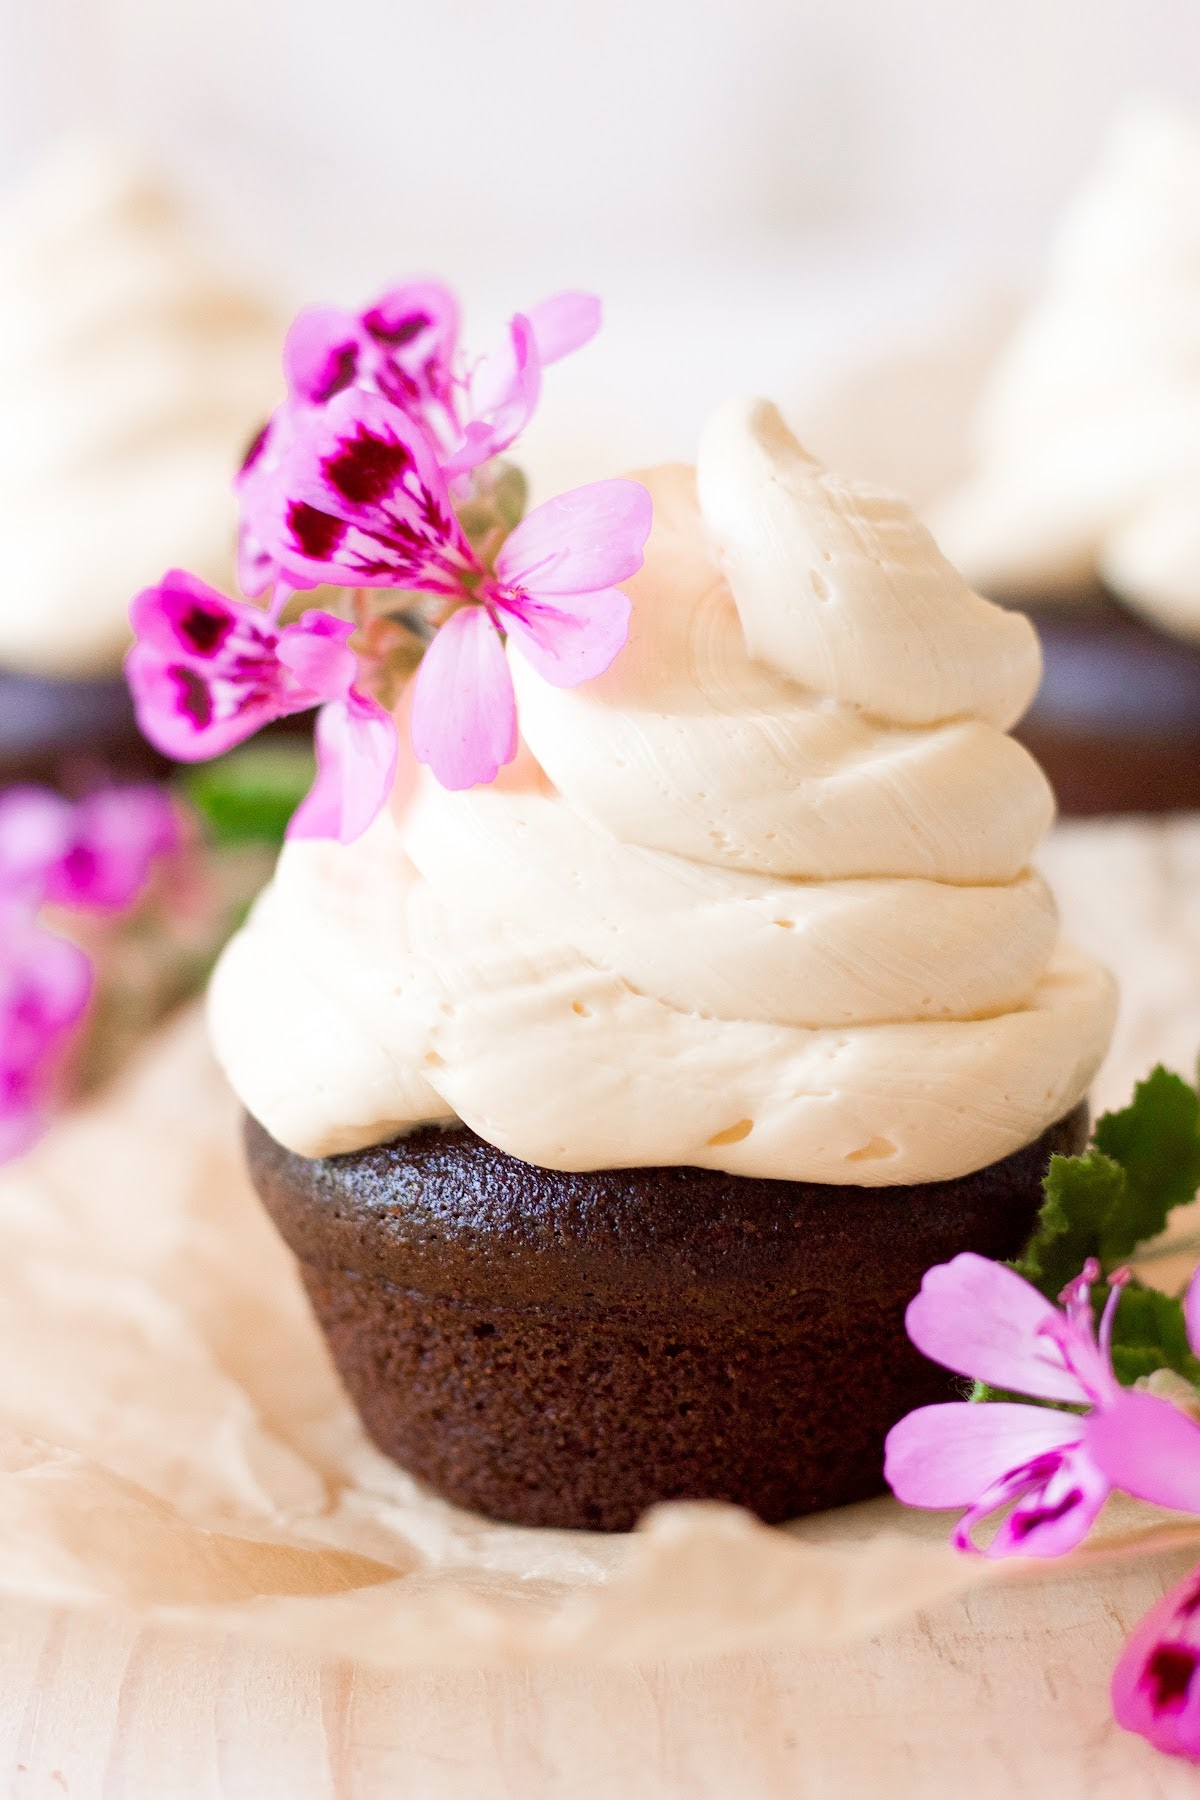 Chocolate cupcake topped with a 2-inch swirl of vanilla buttercream frosting and pink geranium flowers for garnish sitting on top of a square piece of unbleached parchment paper.